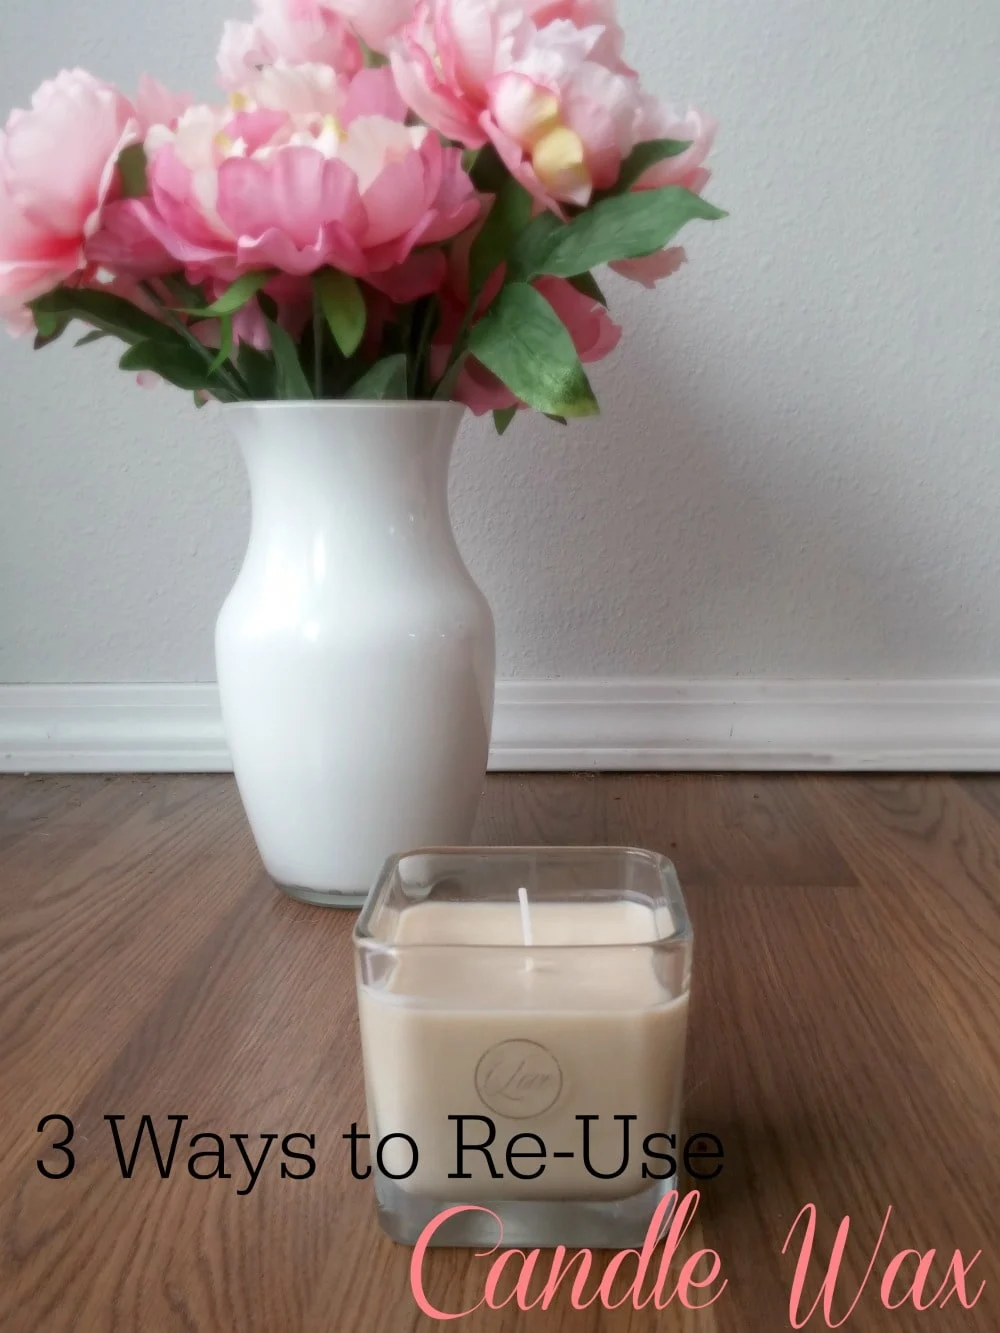 What to do with leftover candle wax: 15 ways to reuse wax